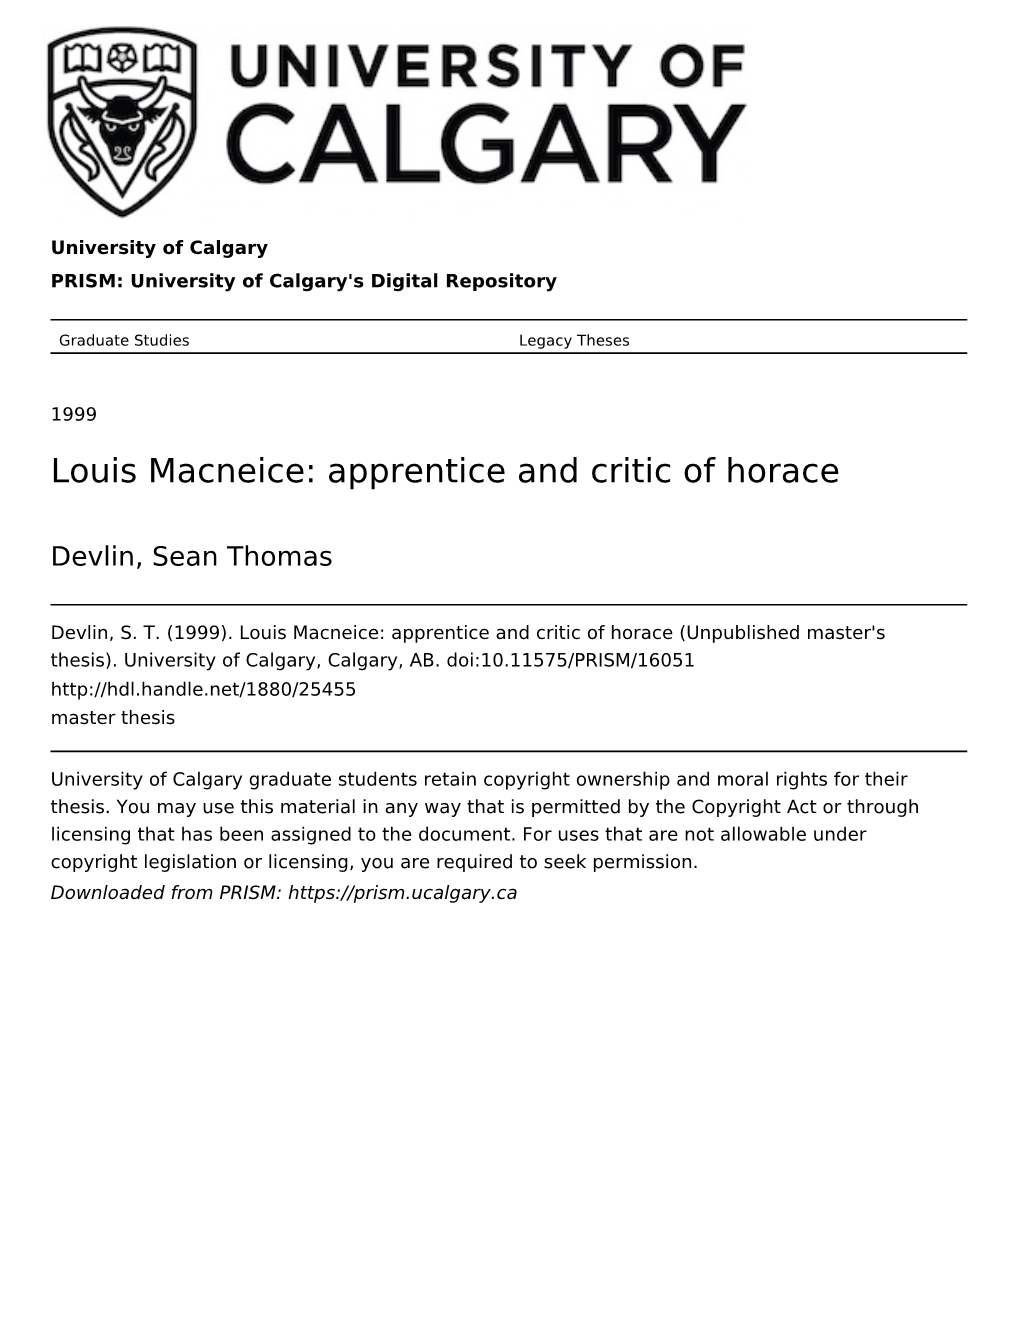 Louis Macneice: Apprentice and Critic of Horace